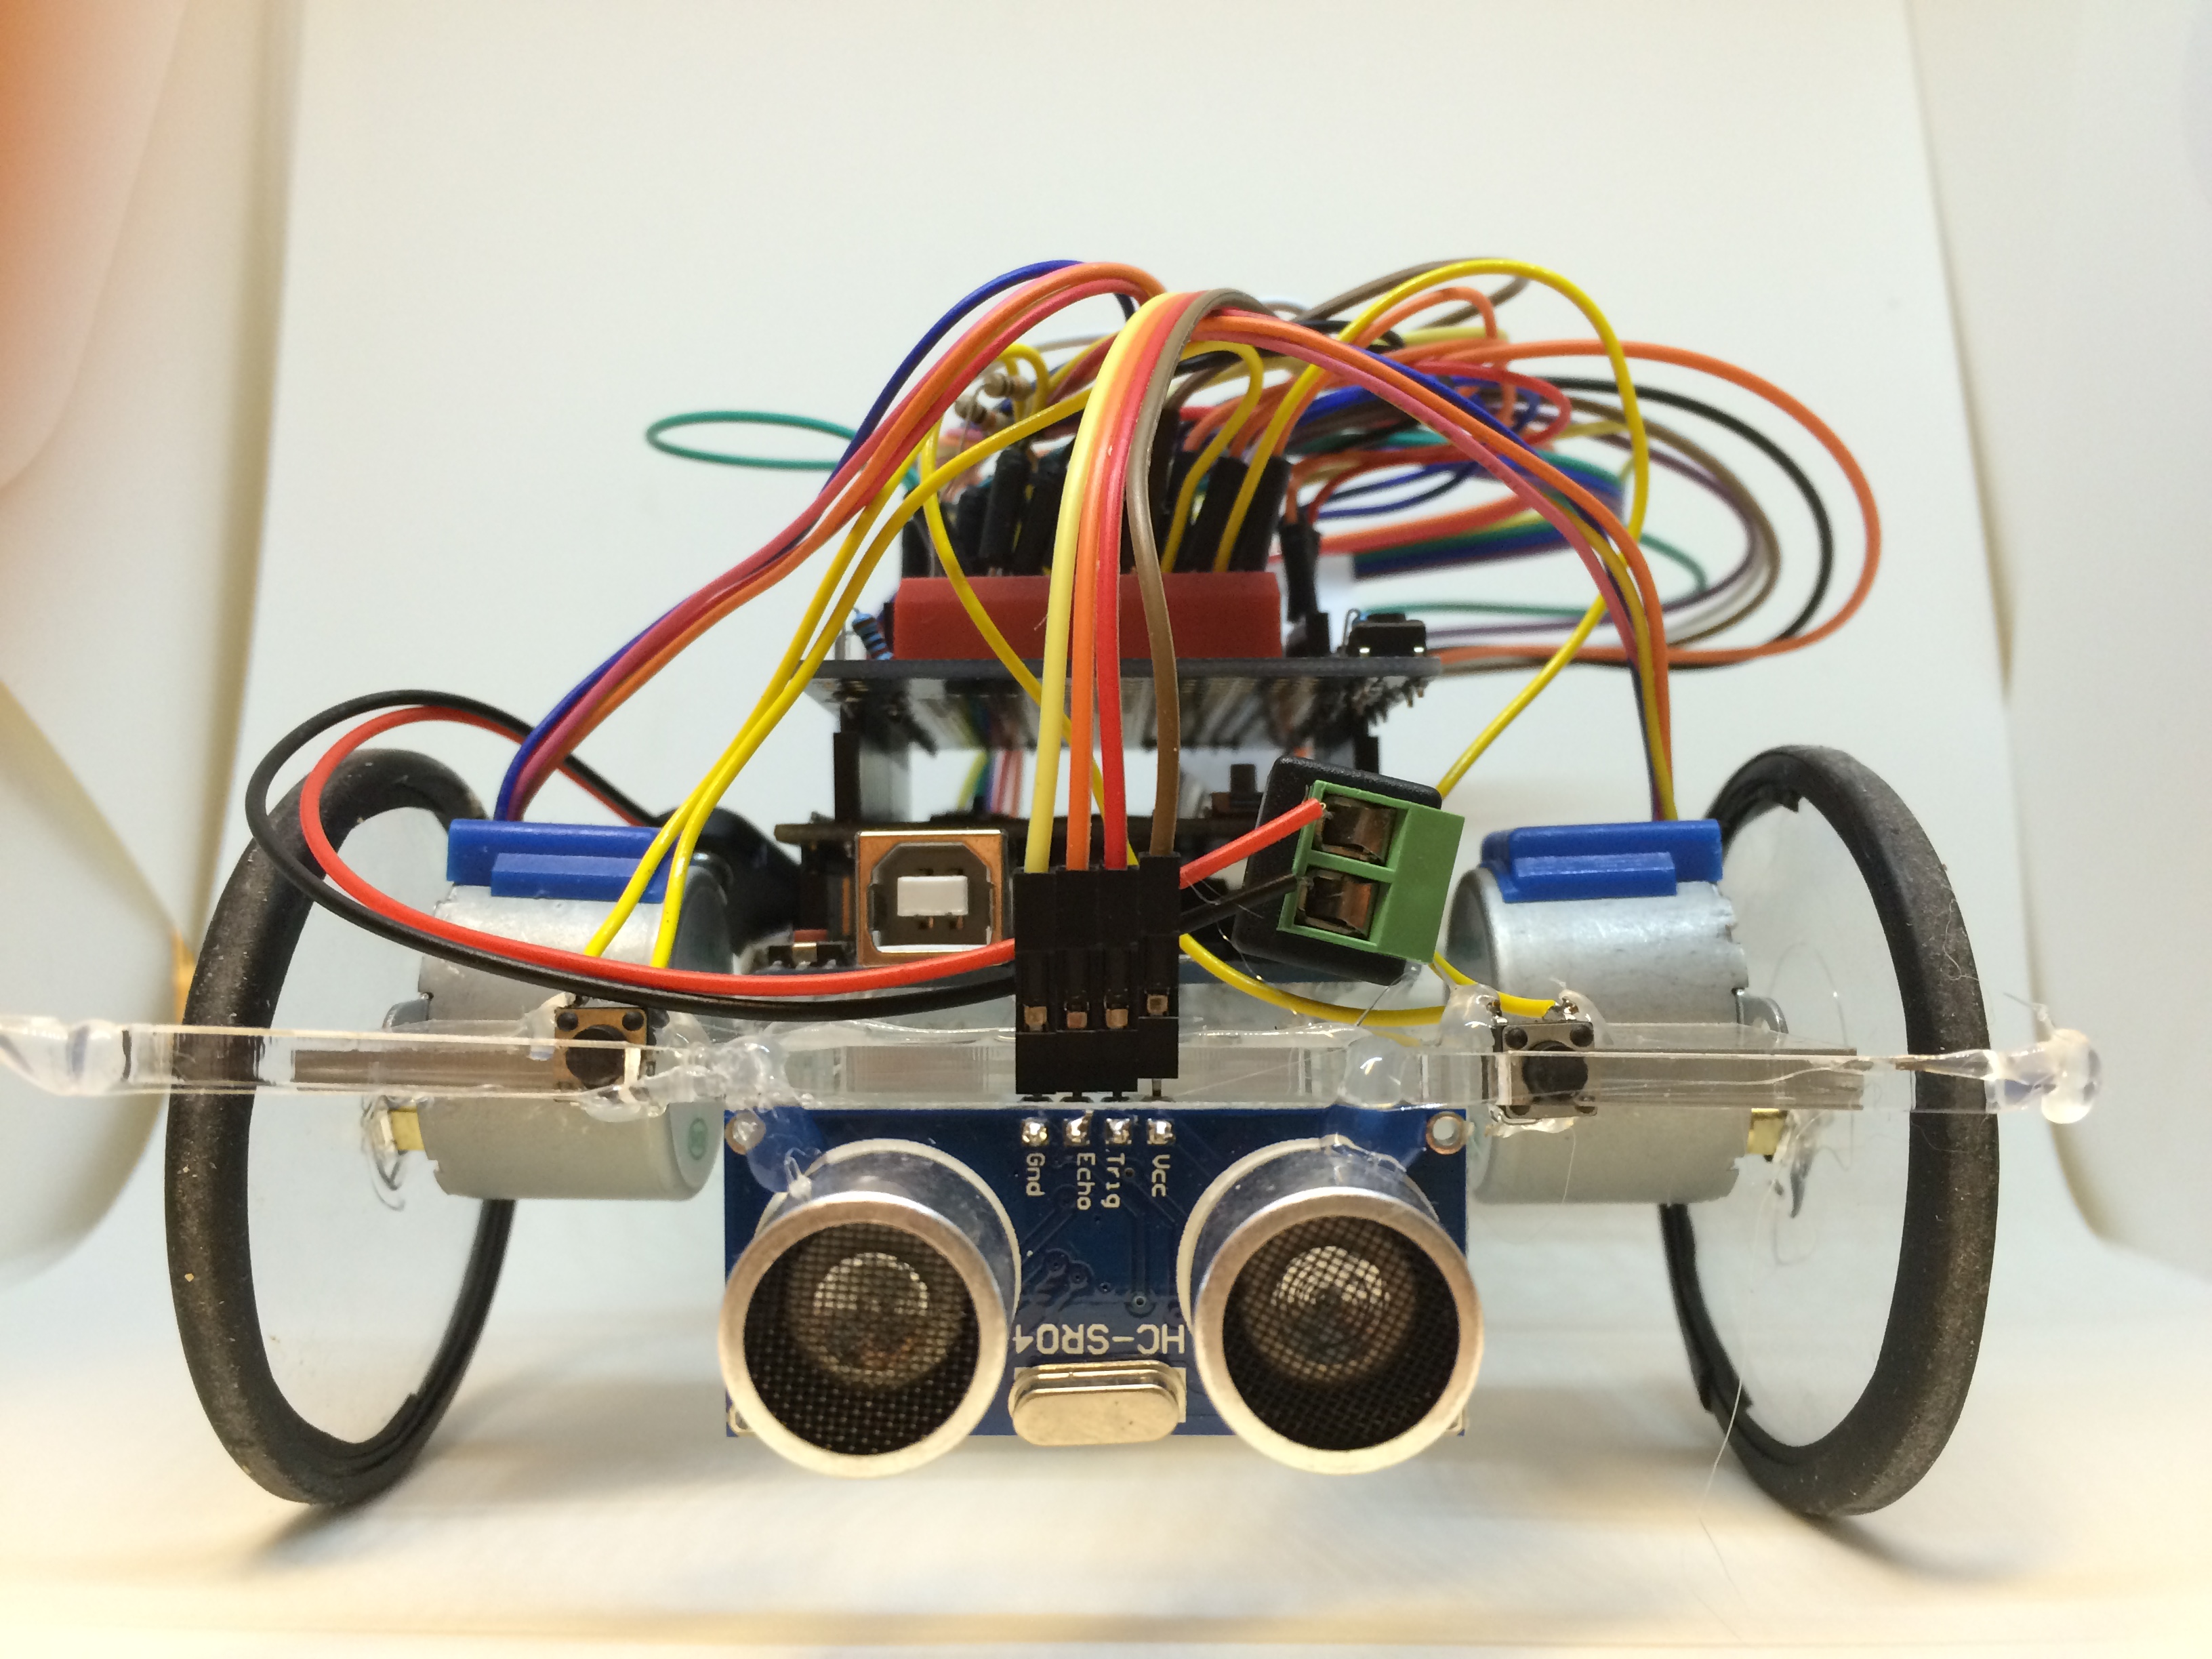 Picture of the robot with the Ping sensor attached.